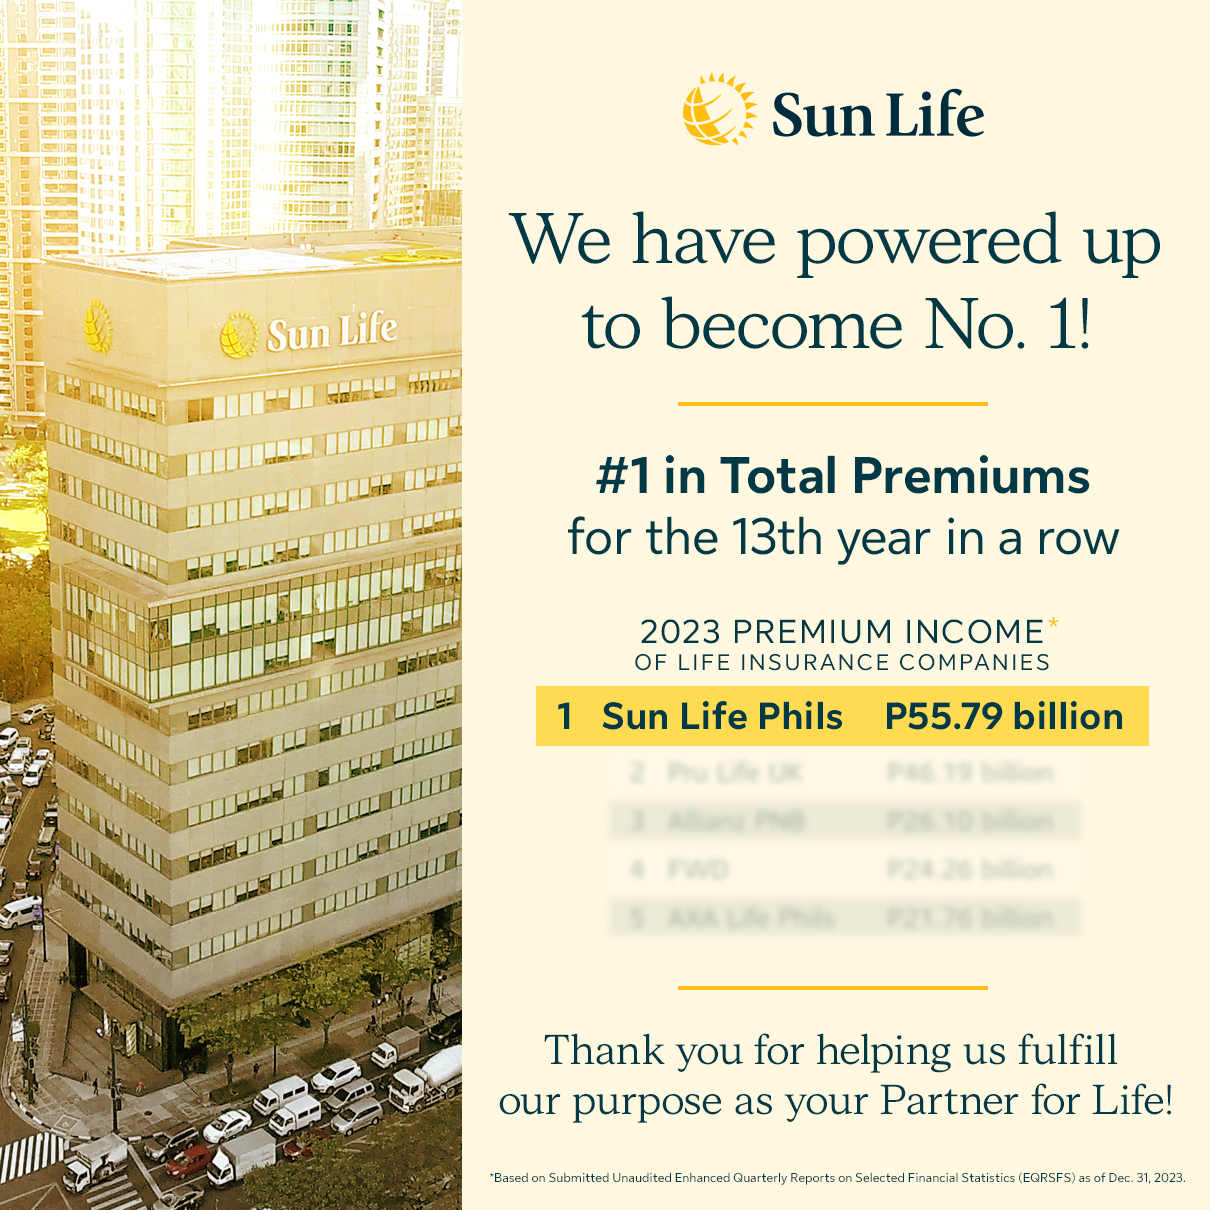 Sun Life reigns as the no 1 life insurance company for the 13th year in a row